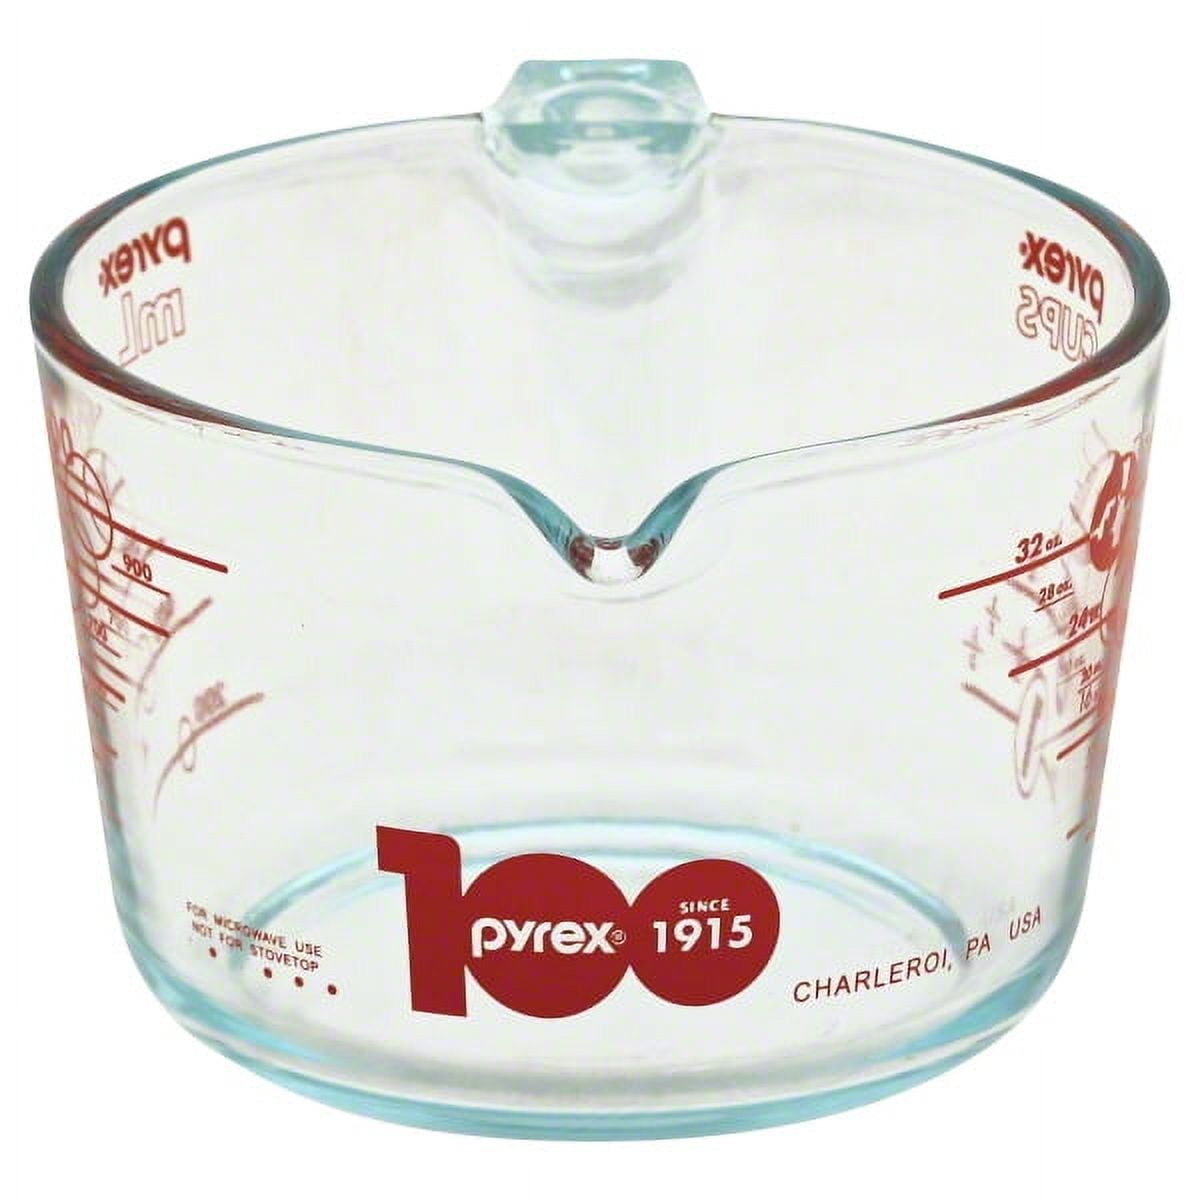 After years of looking I found the 4 cup PYREX measuring cup and completed  the set.. : r/ThriftStoreHauls